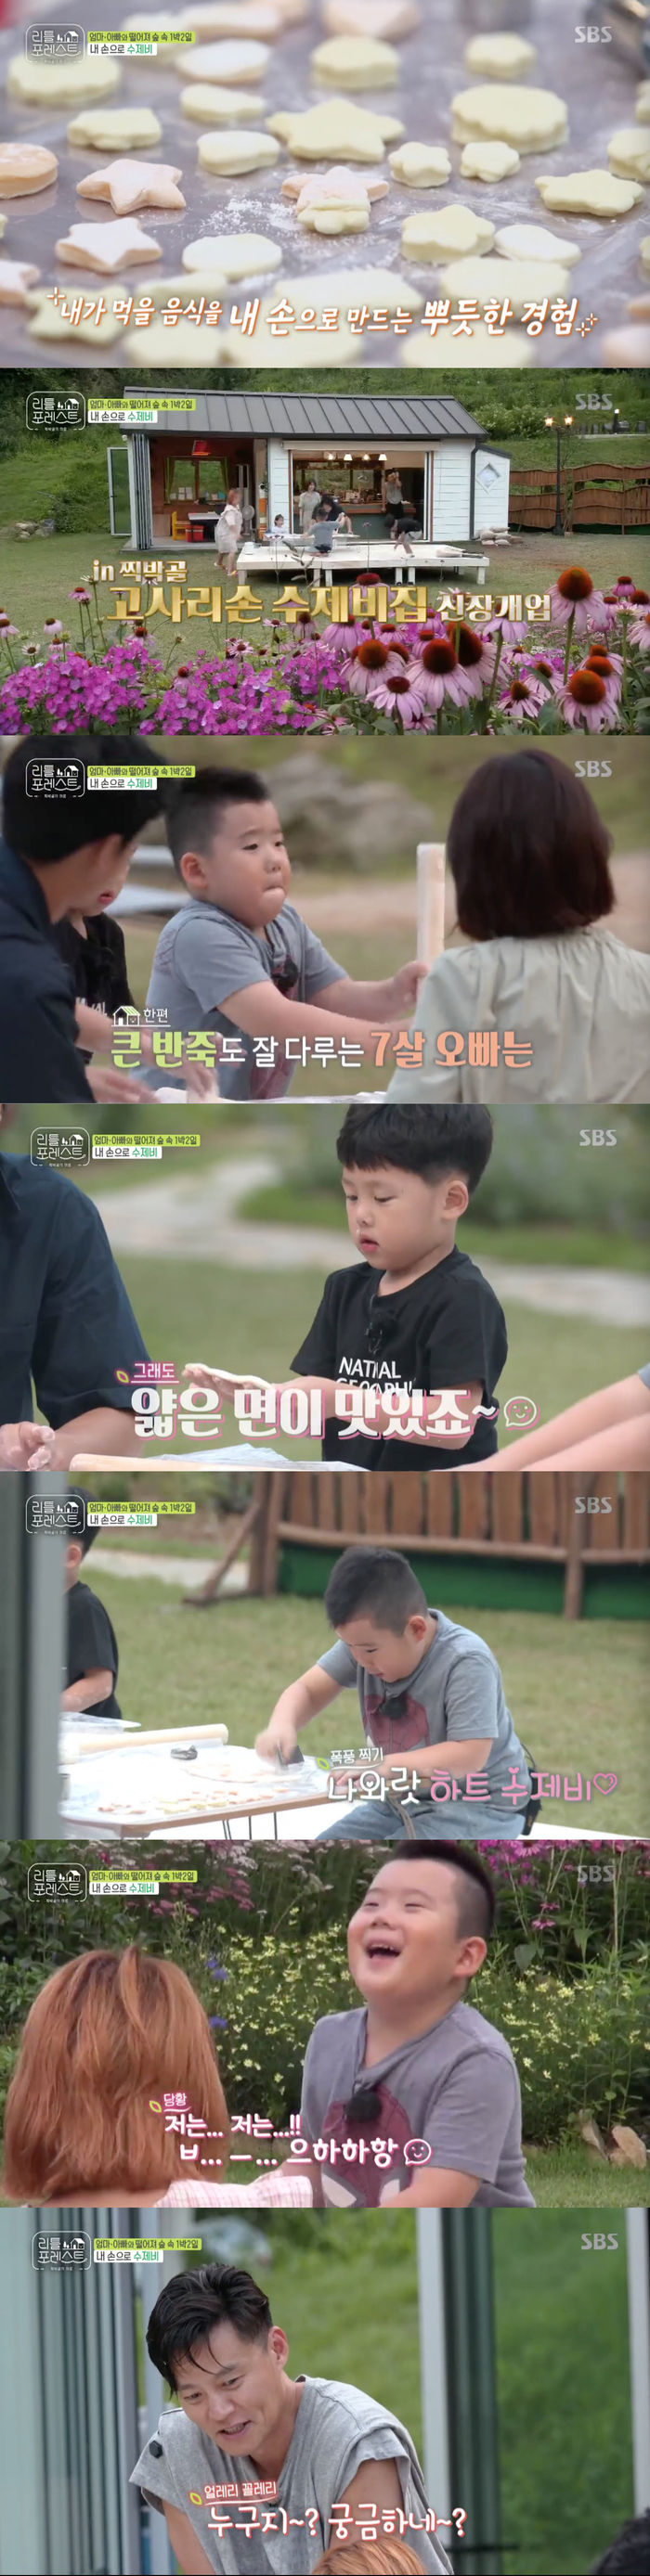 Littles made Sujebi themselves.On SBS Little Forest broadcasted on the 3rd, it was depicted as making Sujebi with Little.On the show, Park Na-rae and Lee Seo-jin worked hard to make Wheat flour dough, and asked Lee Seung-gi where the Little Guys went.What I was trying to make Sujebi with my kids.Lee called the Littles to make Sujebi, and they pushed the Wheat flour dough into the pusher as The Uncle and his aunt taught him.He took a frame of what he wanted.Seeing Lee Han-i, who makes a hard-working heart-shaped Sujebi, Lee Seo-jin asked, Who do you make so many hearts to give to?Lee said, I am ... B ... Hahahaha. Lee Seo-jin and Lee Seung-gi looked at Lee Han and said, Who are you going to give? Who is it?I wonder, he said, Bevevevbb Brook.After a while Brooke appeared; The Uncle, who wanted to make Sujebi together, and Brooke, to her aunts, laughed when she said, I want to eat prunes.However, Lee Han made Sujebi hard to the end and made a warm heart.